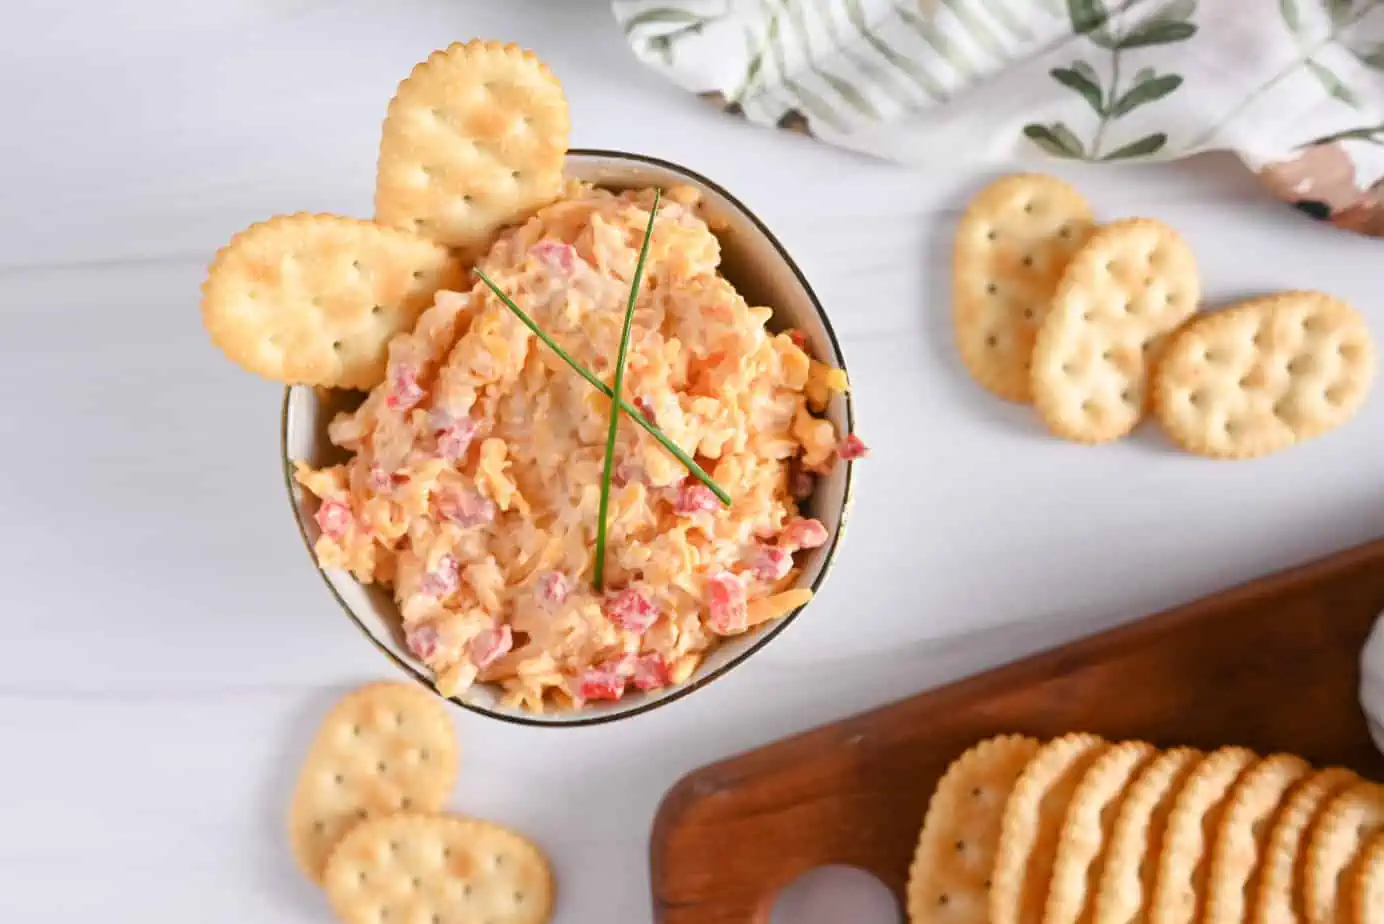 Bowl of pimento cheese next to a cutting board with crackers on it.